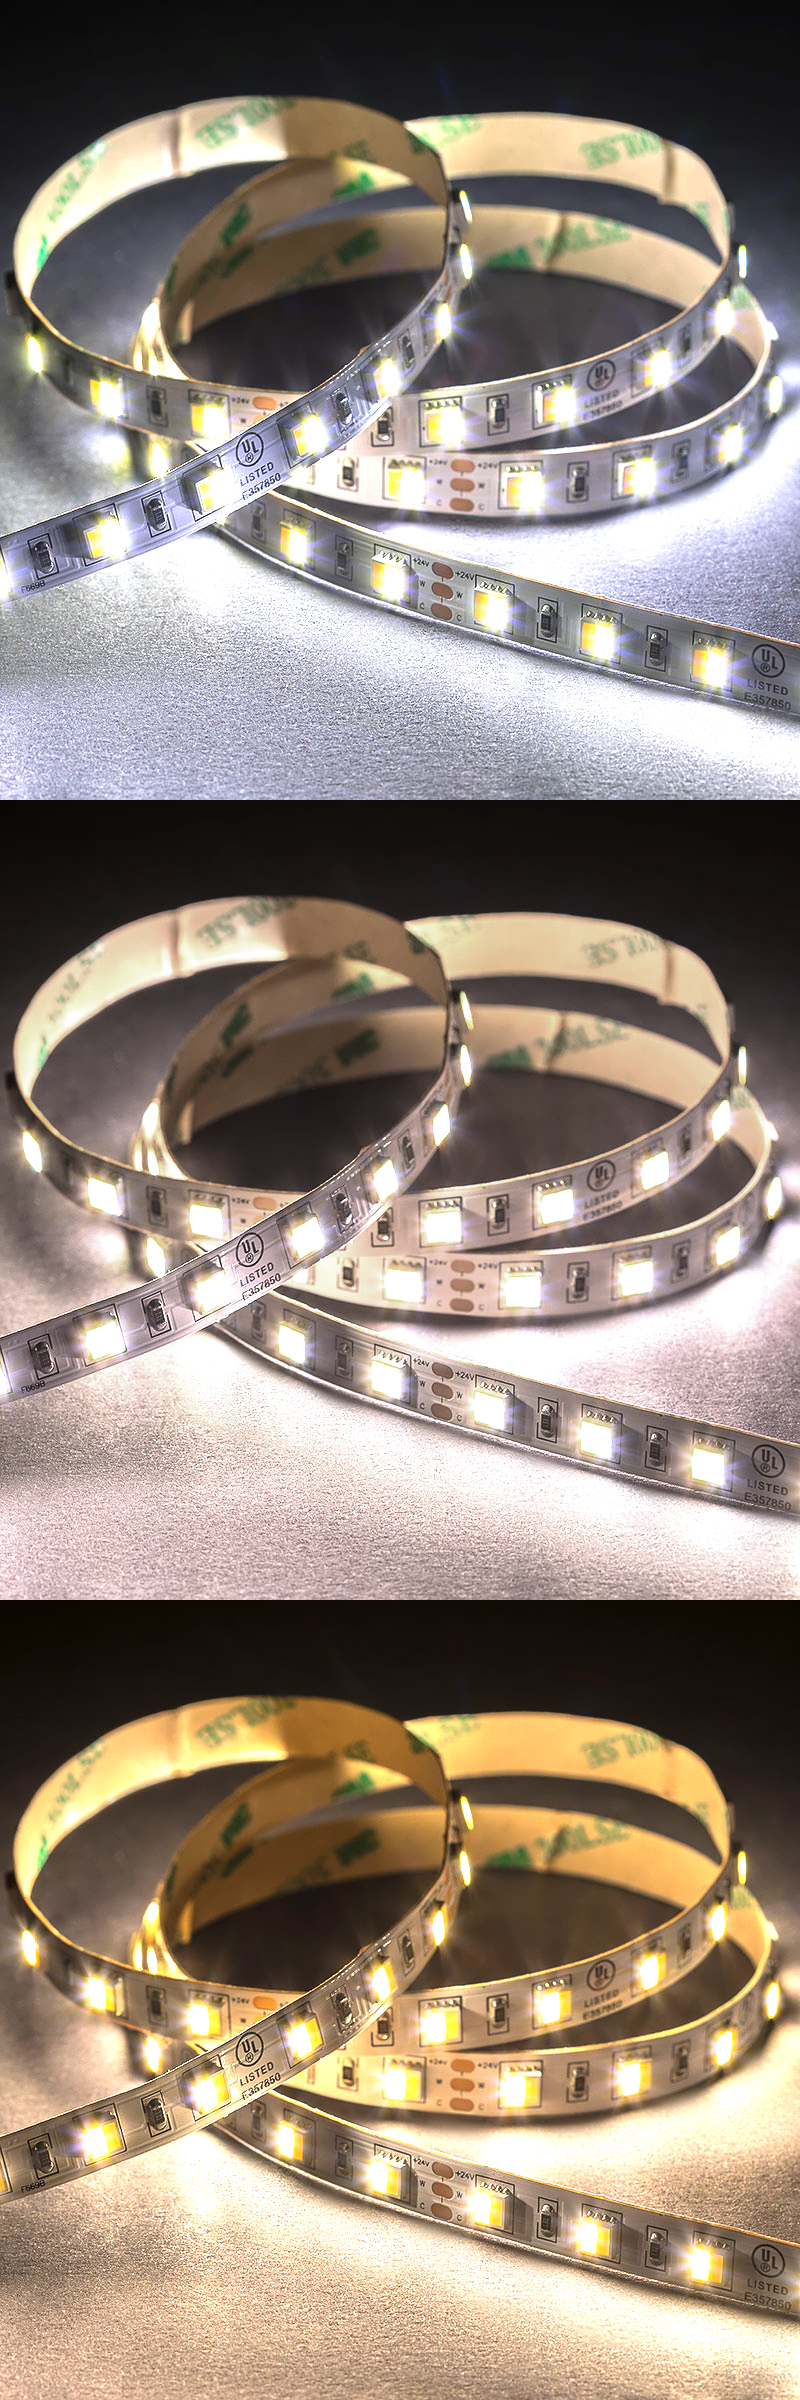 5m Tunable White LED Strip Light - 2-in-1 Color-Changing LED Tape Lights - 24V - IP20 - Click Image to Close